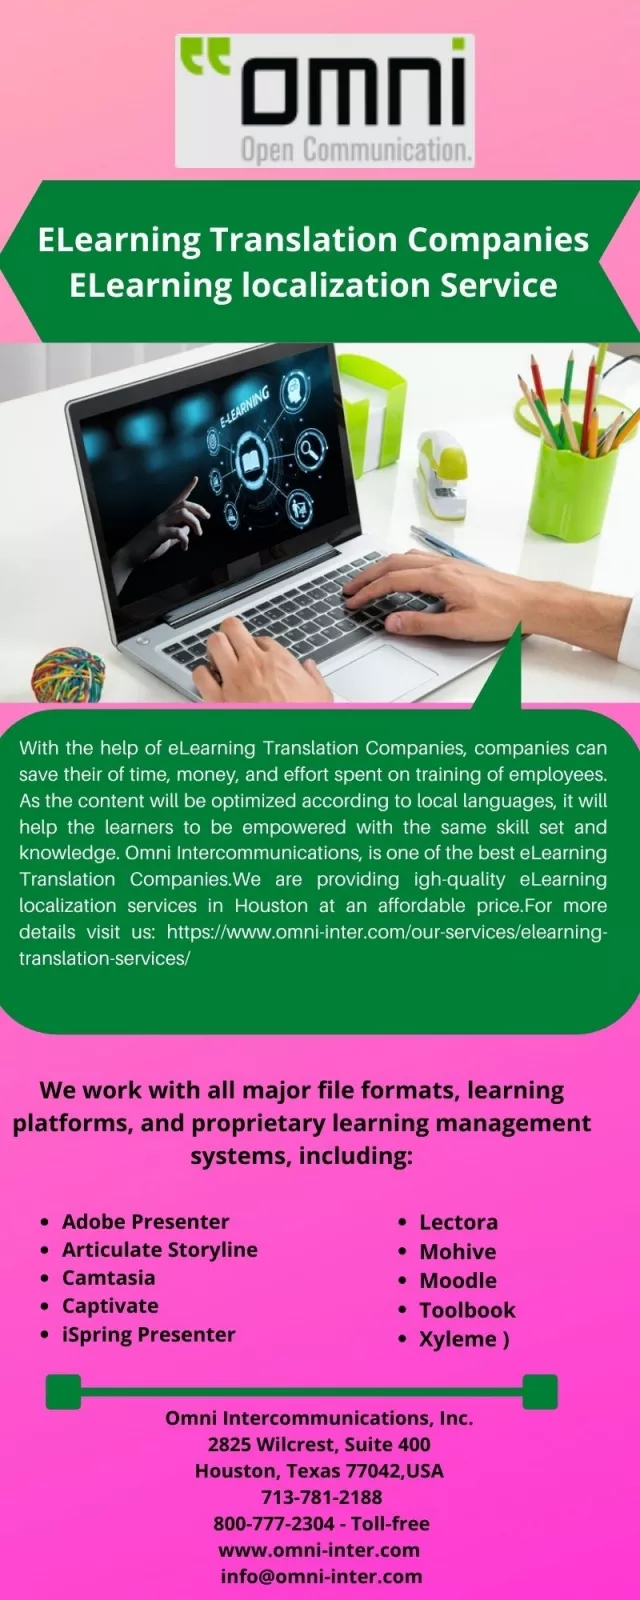 Financial Translations services